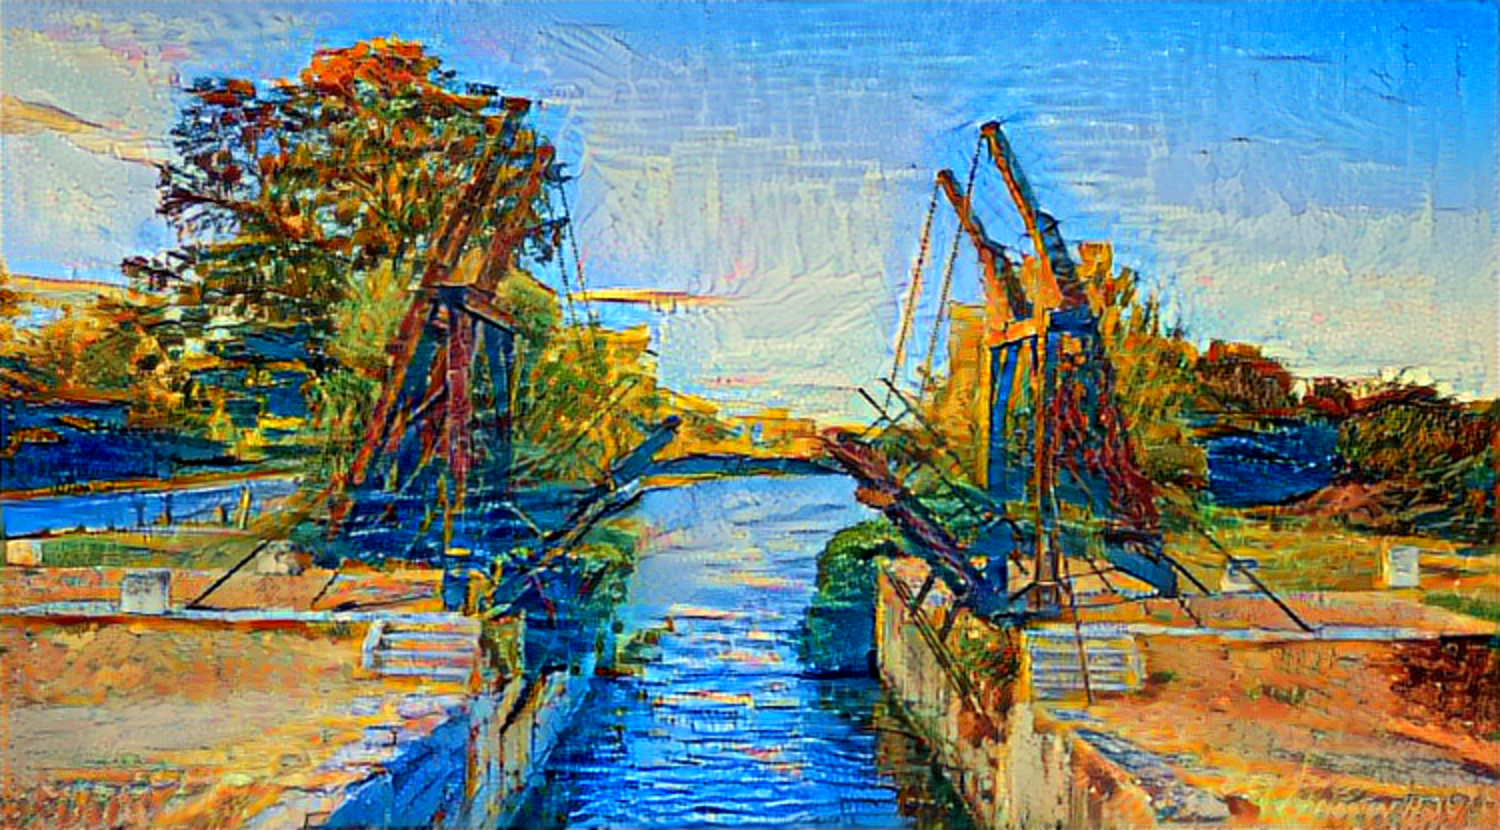 Result: The Langlois Bridge at Arles, Neural Style Transfer